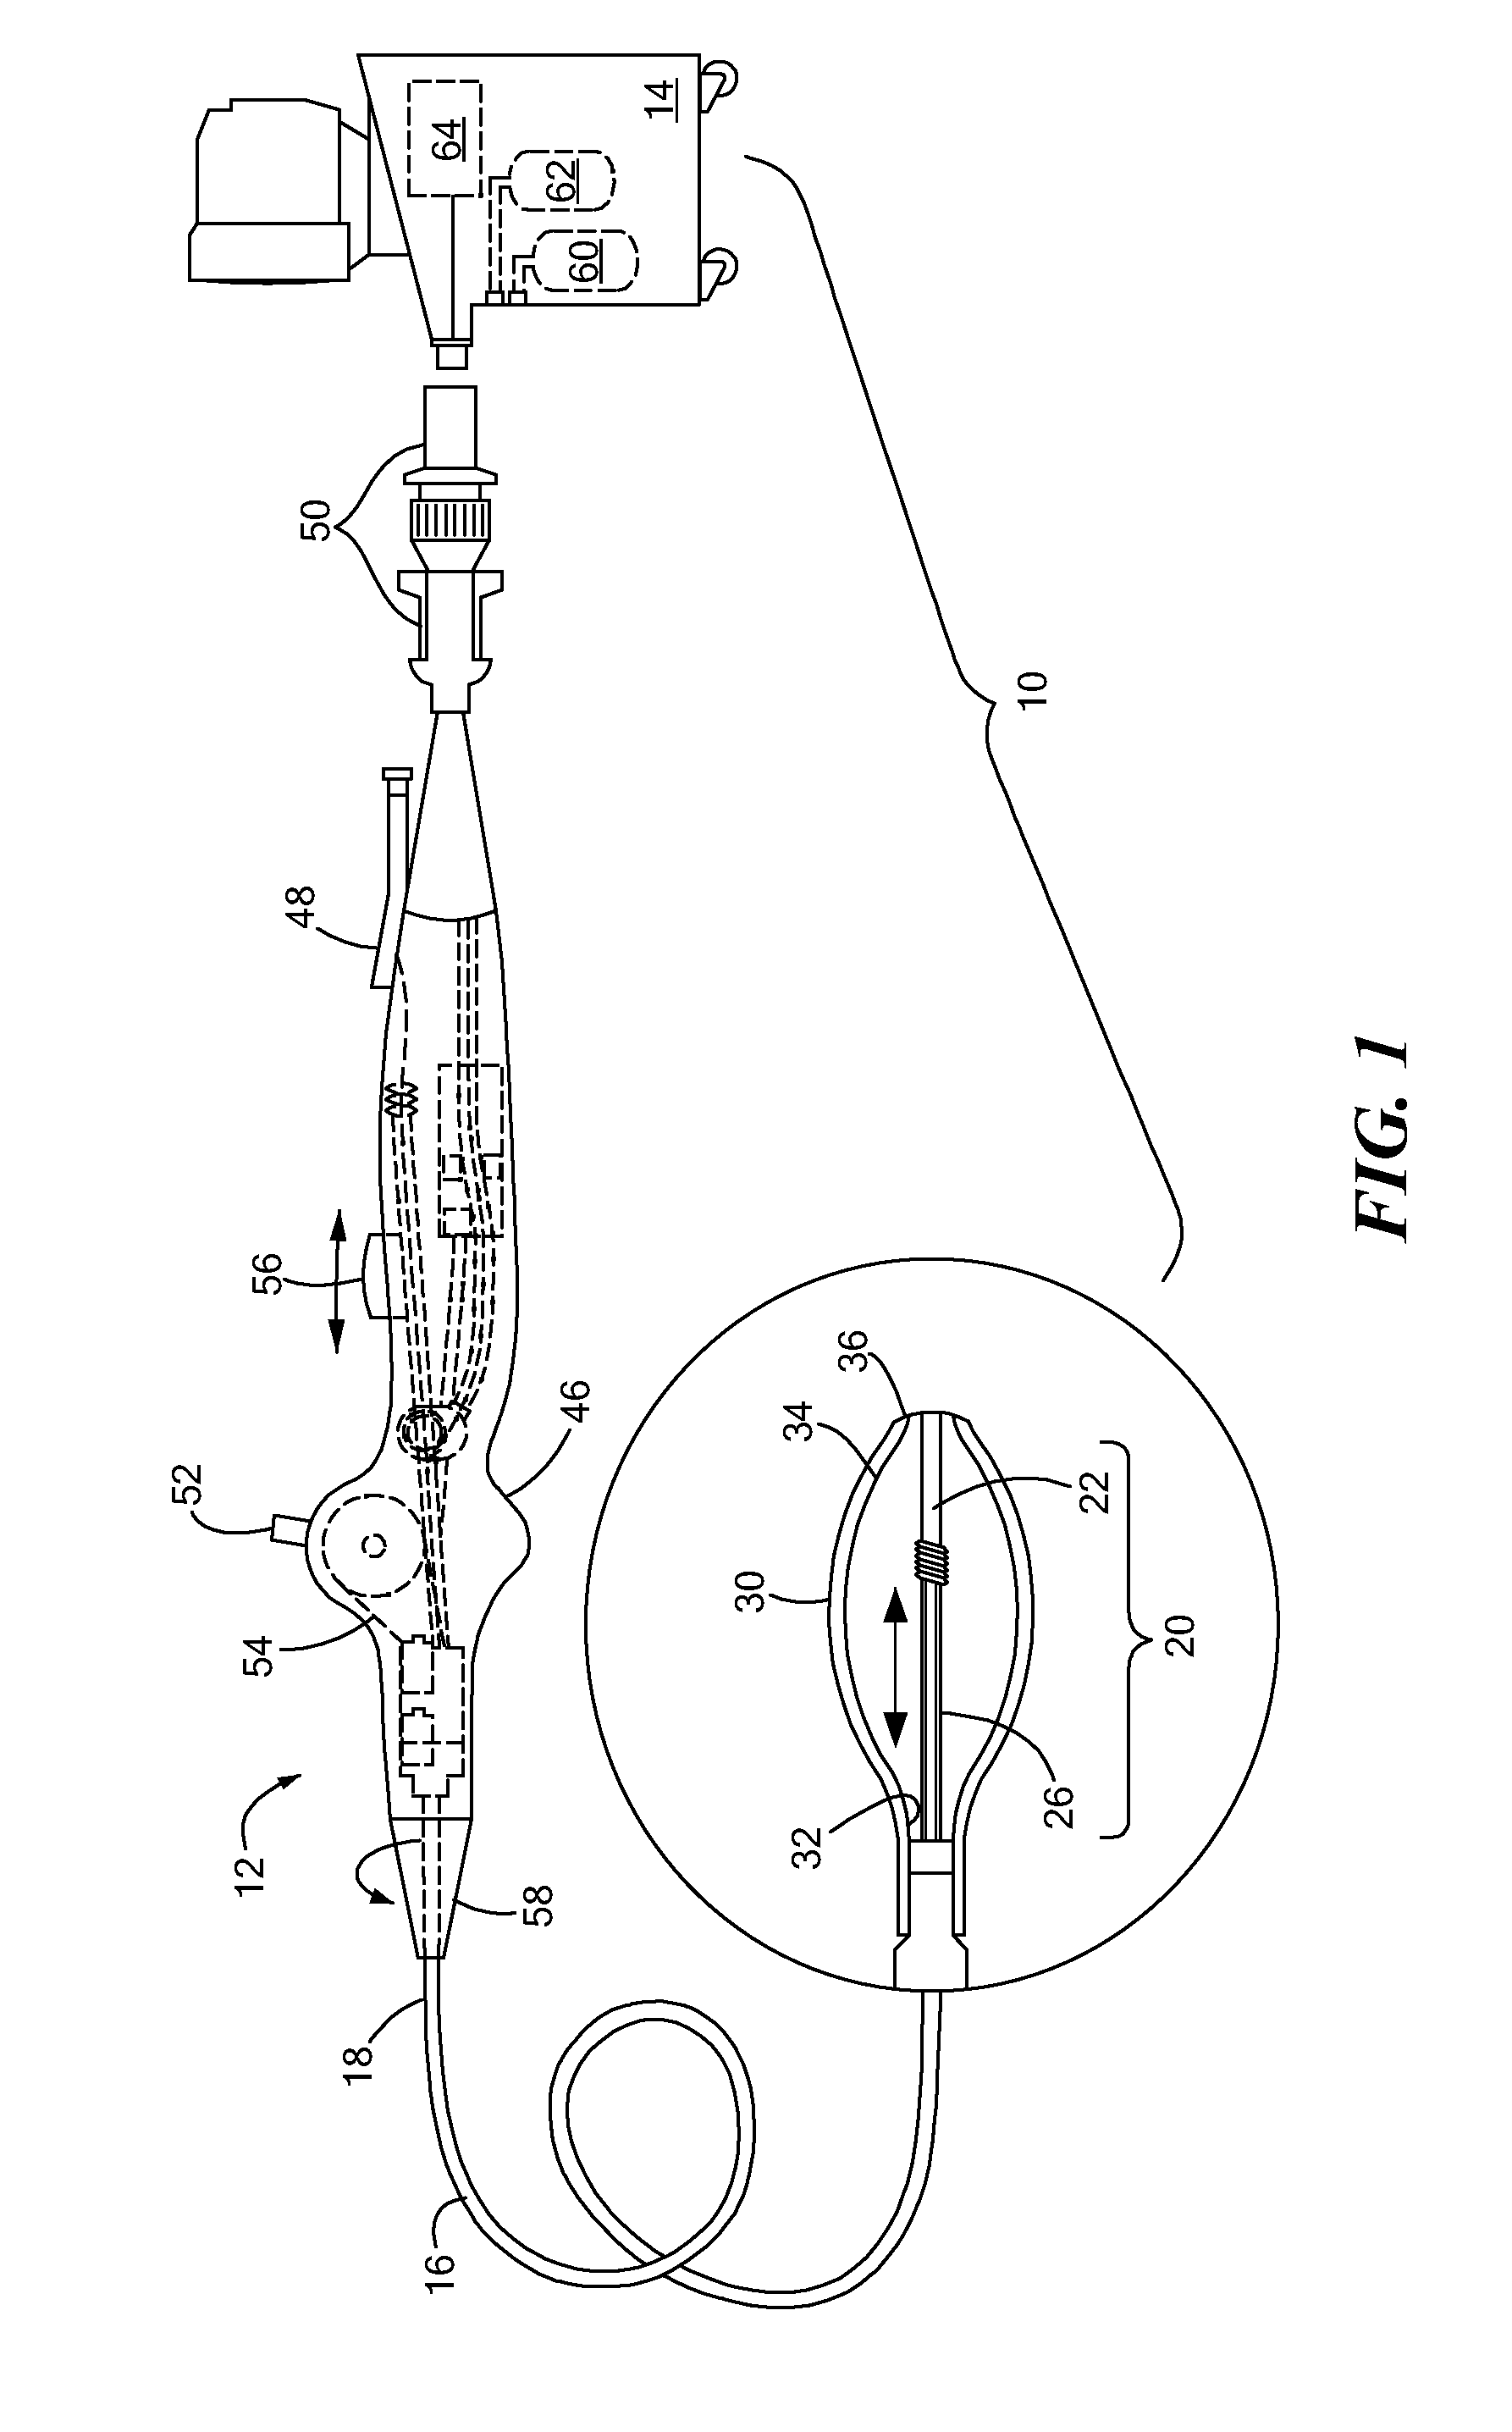 Electrical sensing systems and methods of use for treating tissue